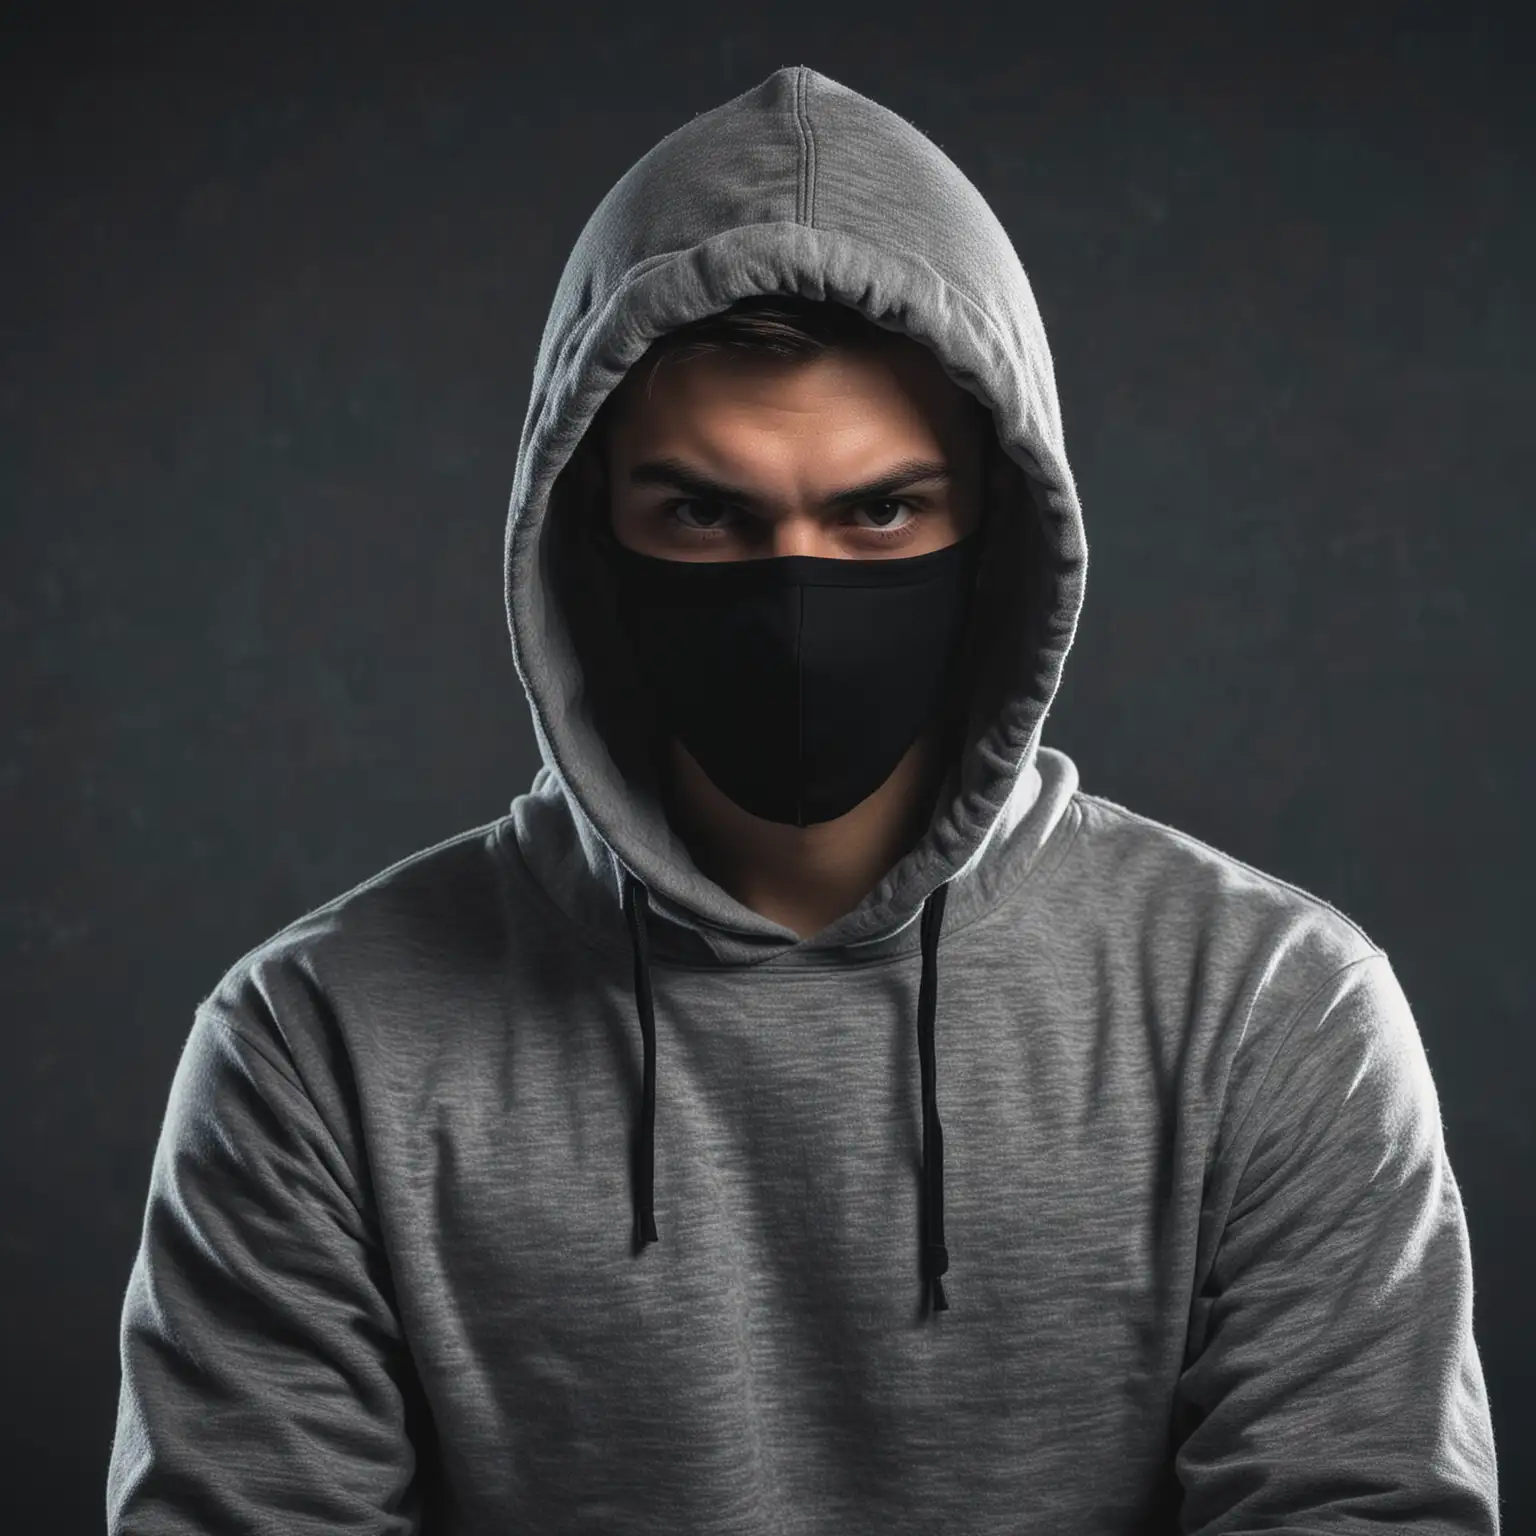 hacker in hoodie and mask, 24 year old, serious expression, dark computers room background